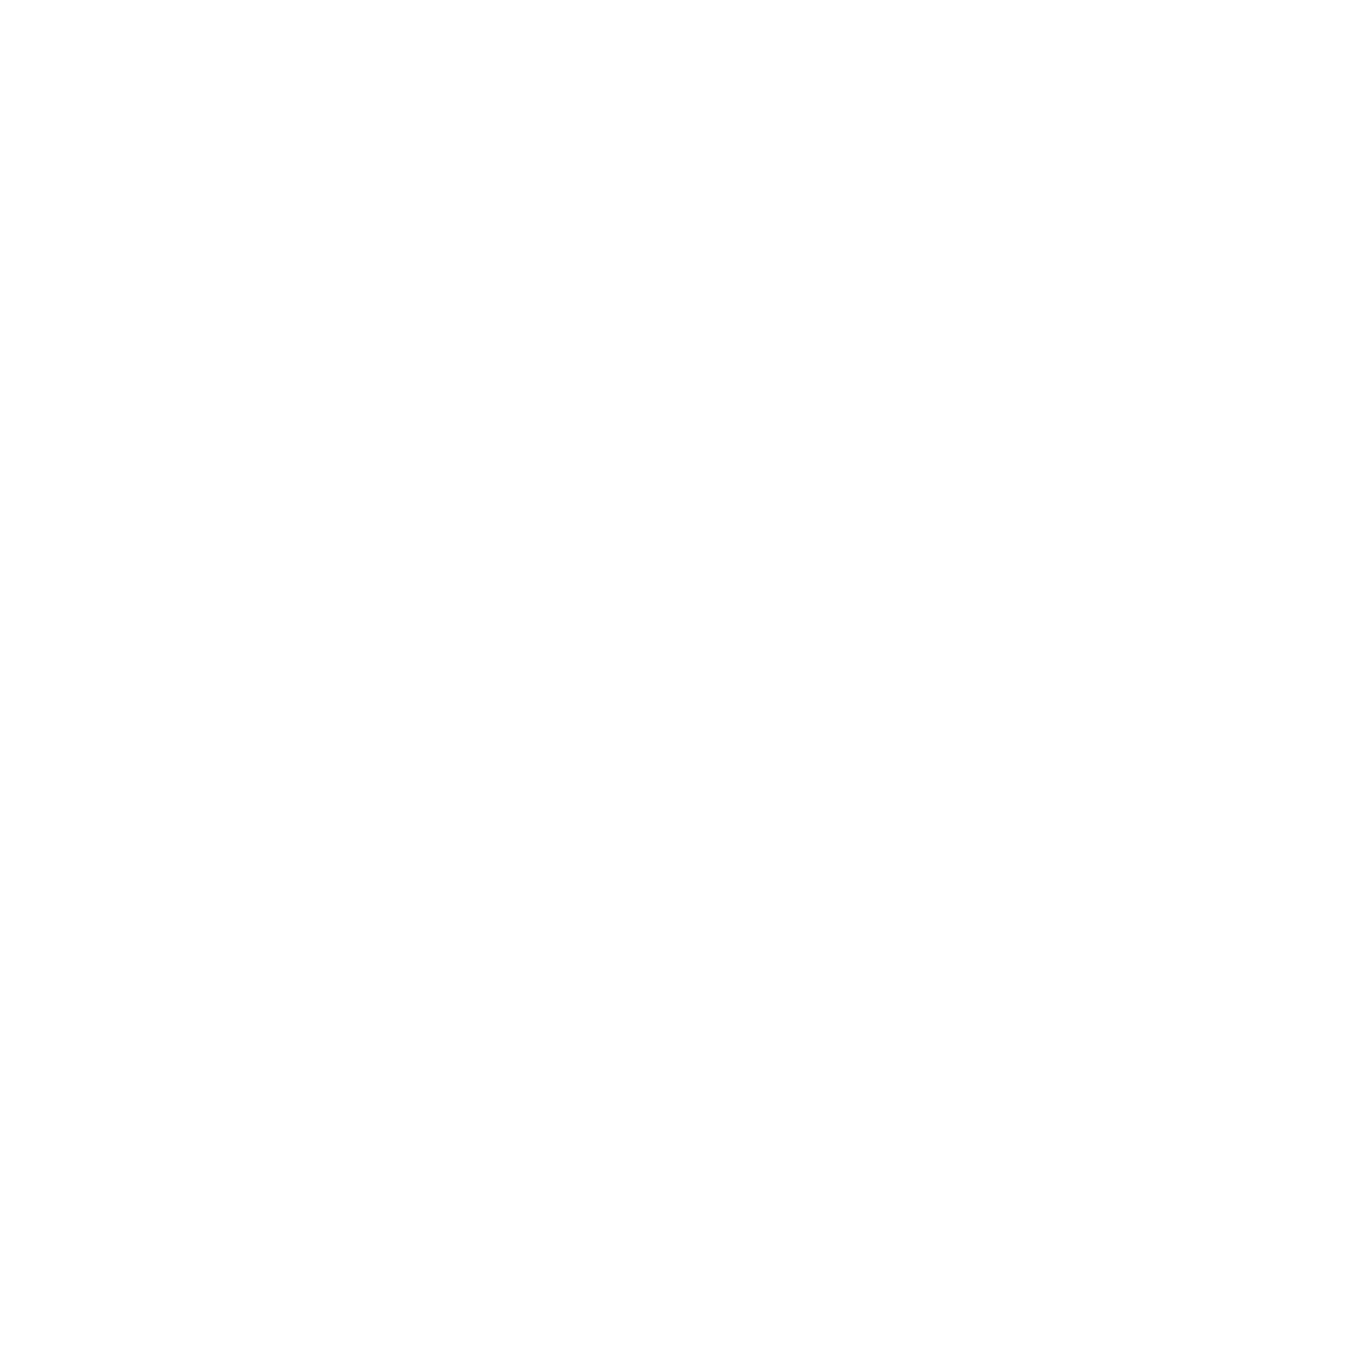 A small transparent graphic of a houses floor plan.